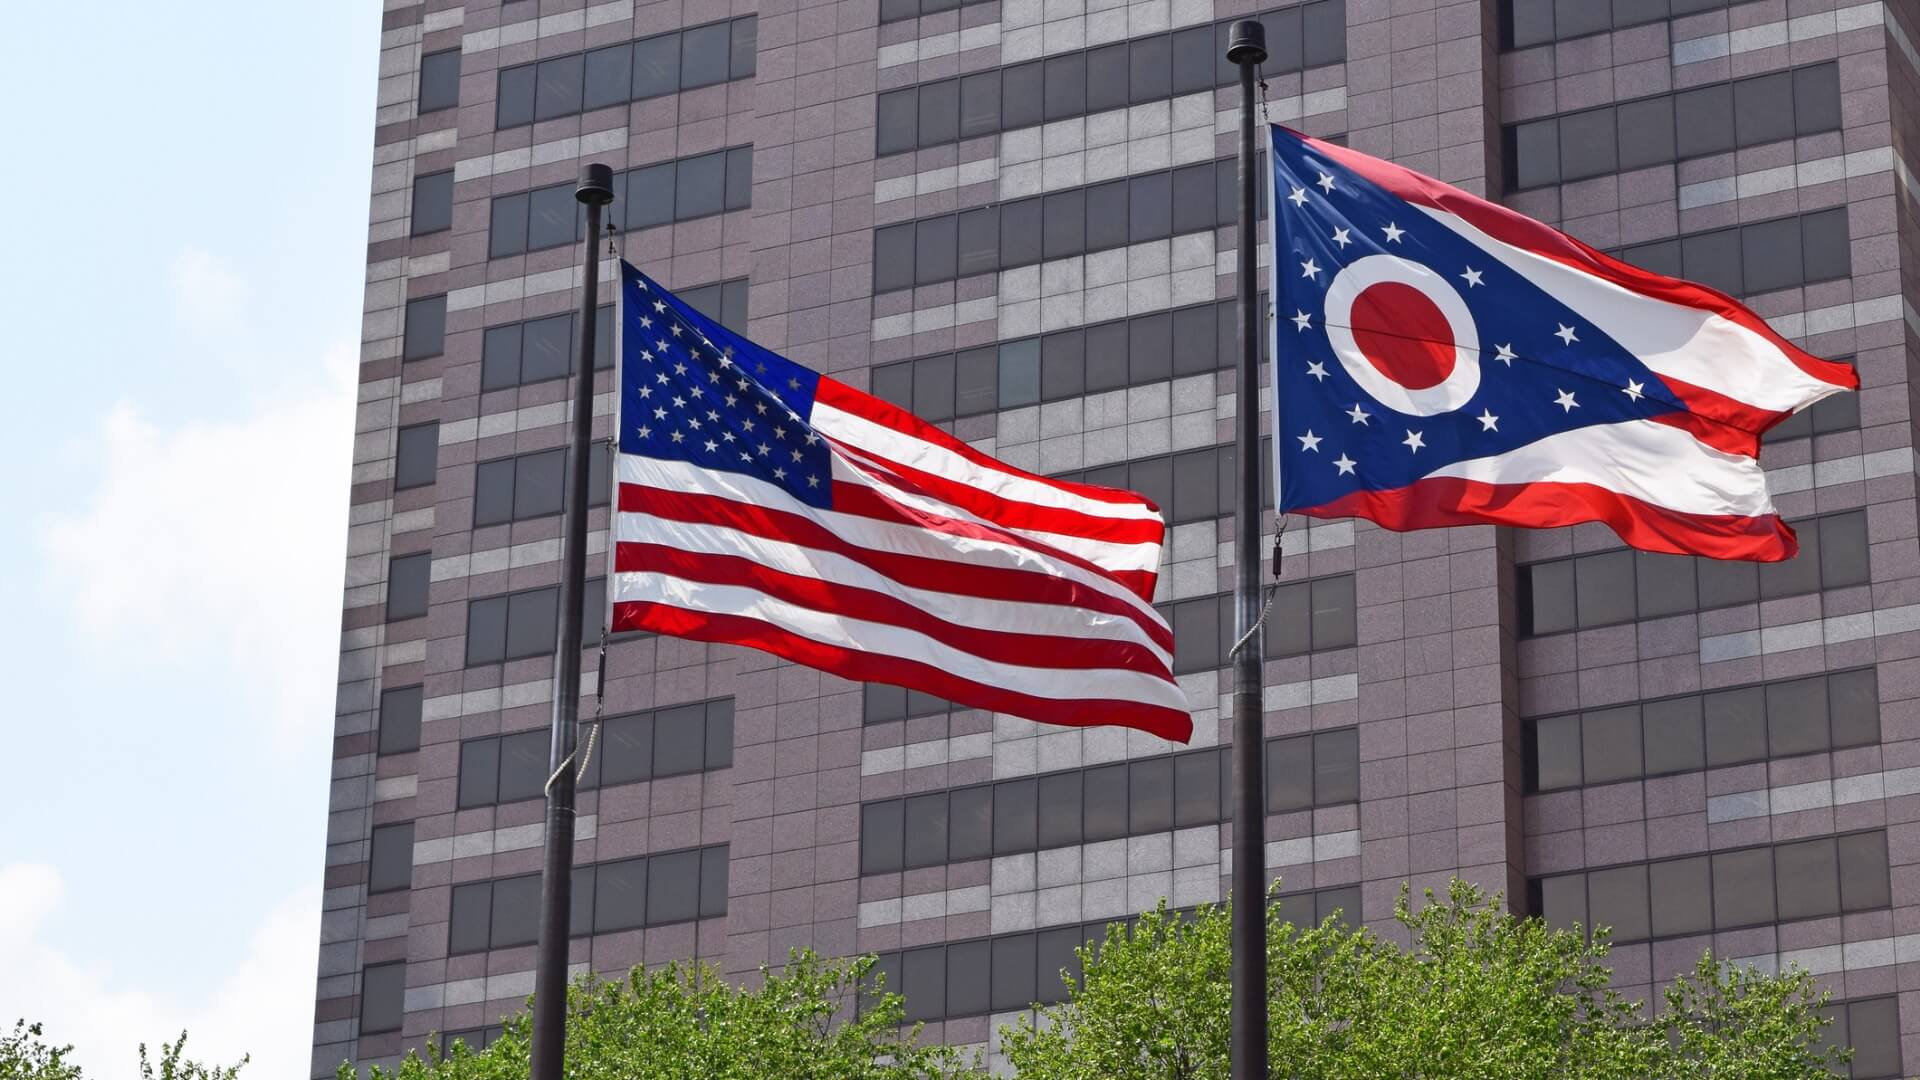 US flag flying next to the Ohio state flag